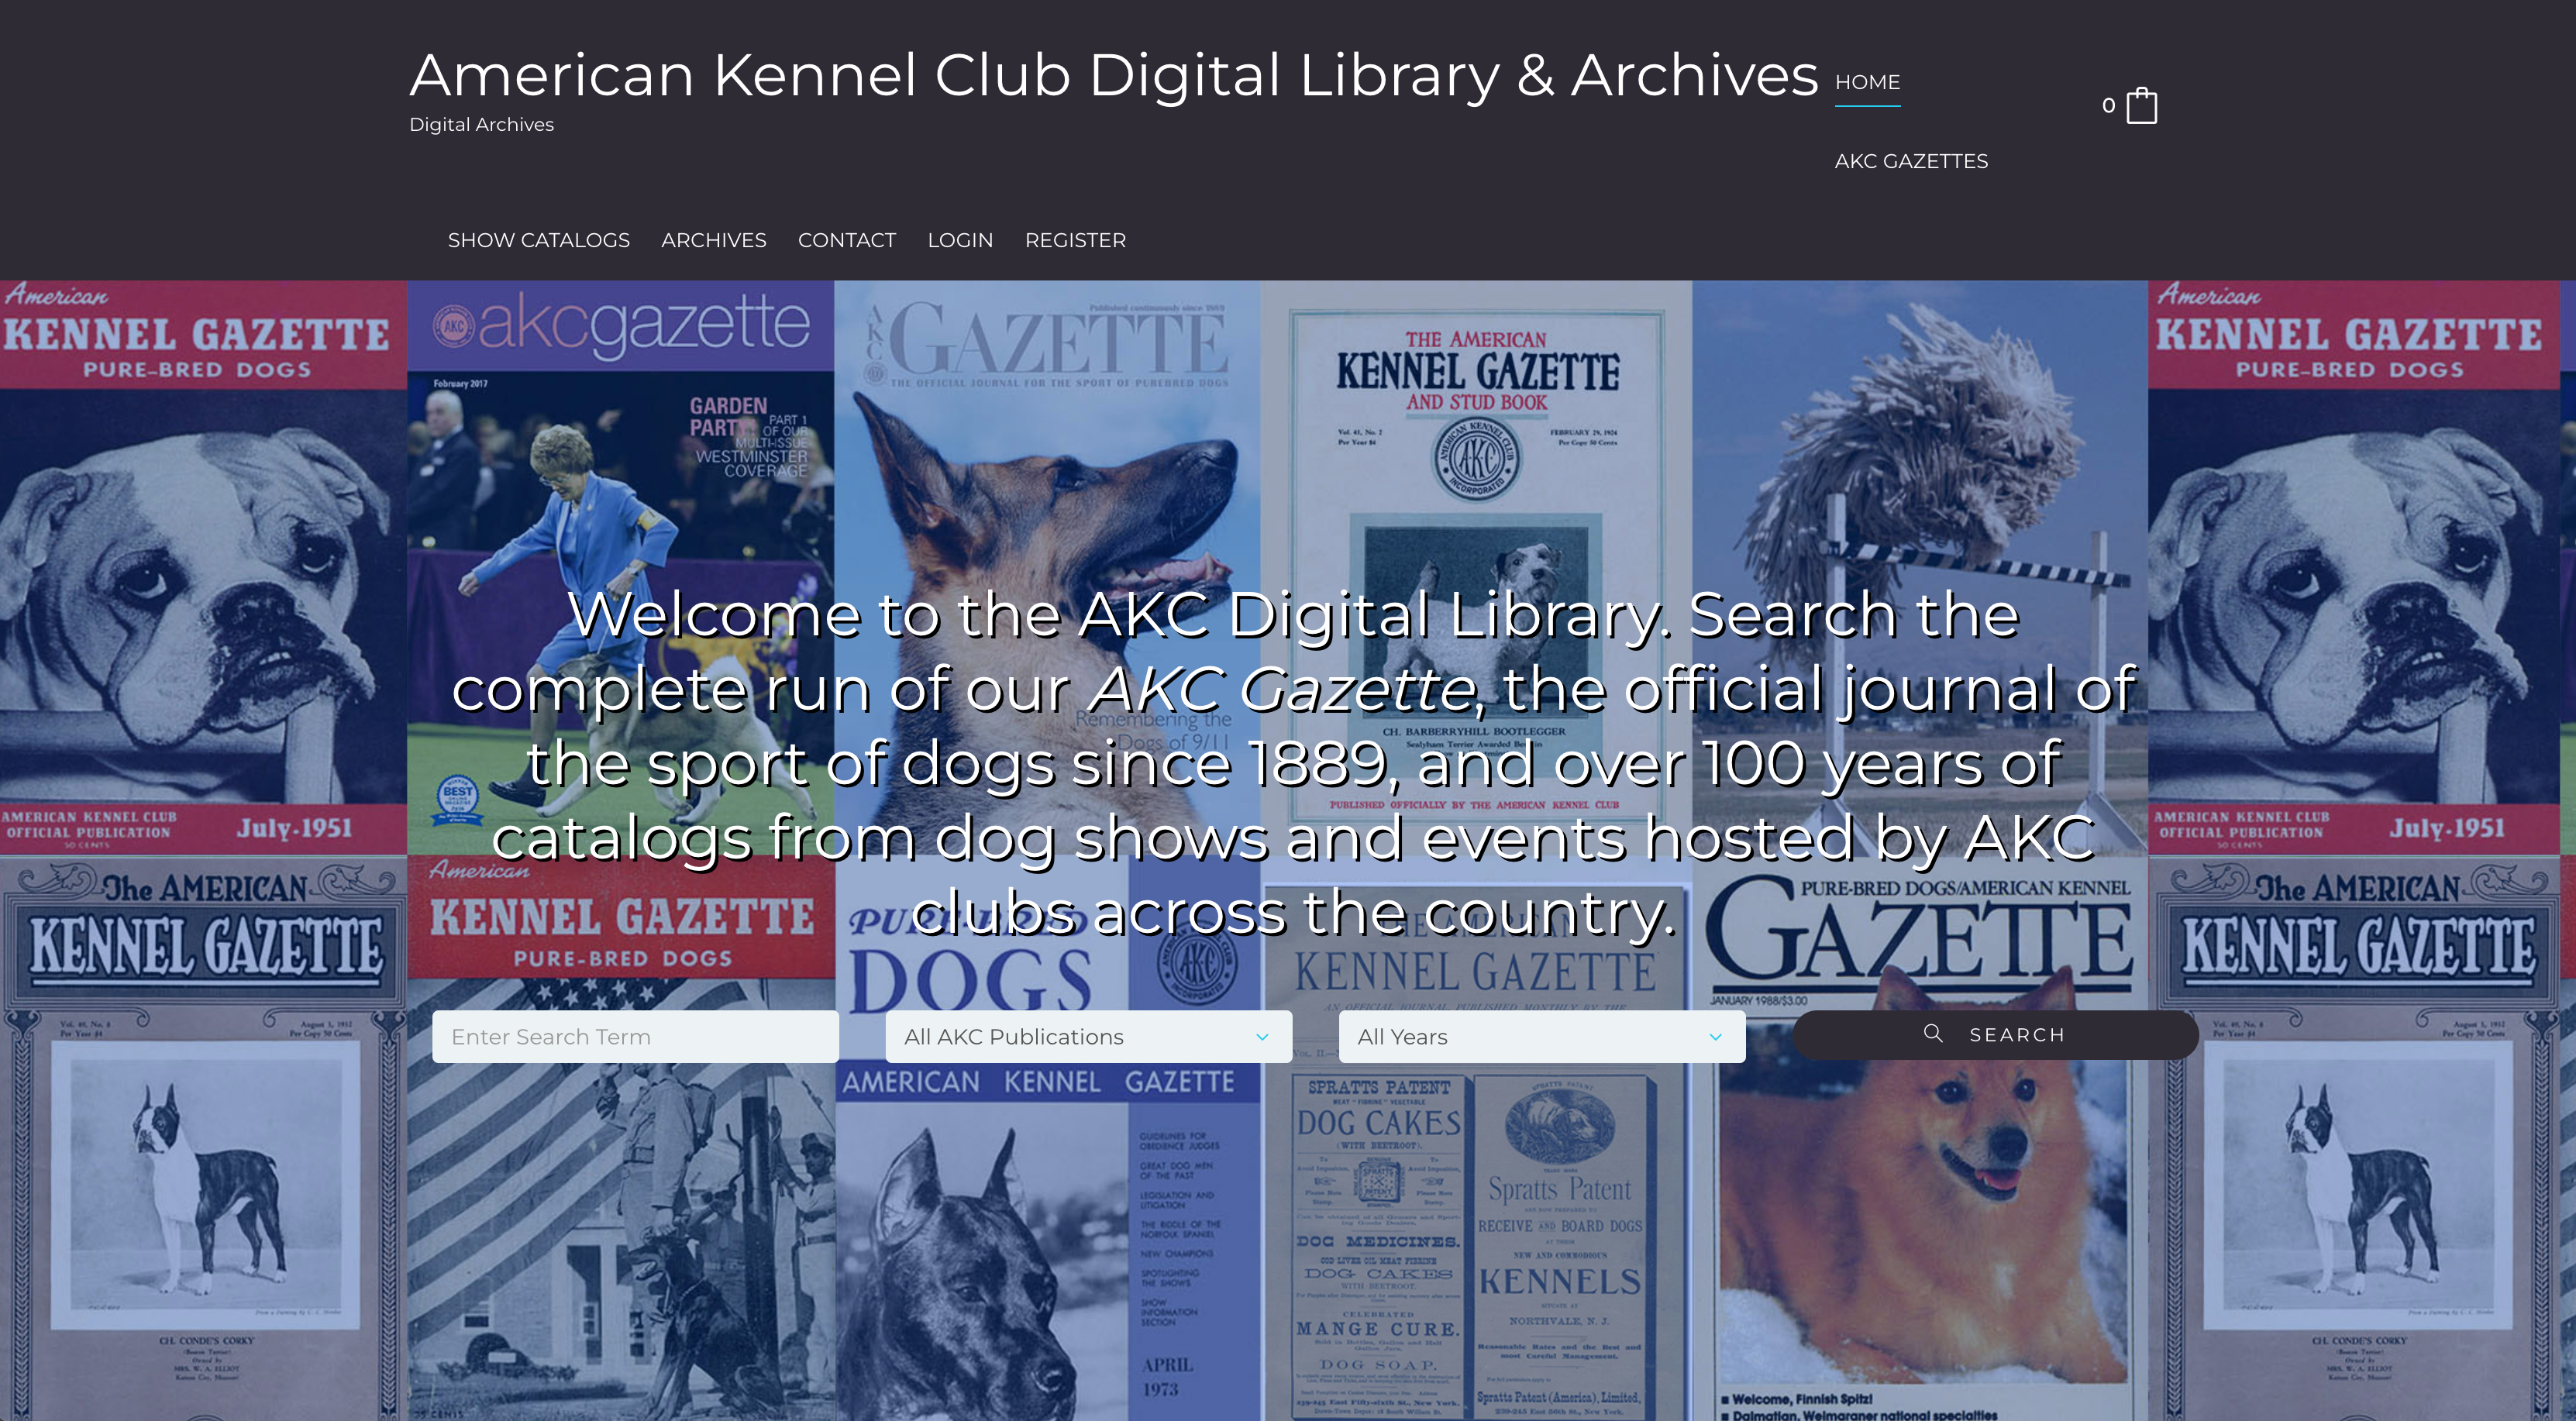 New Research Tools: American Kennel Club (AKC) Launches Digital Library to Commemorate Anniversary